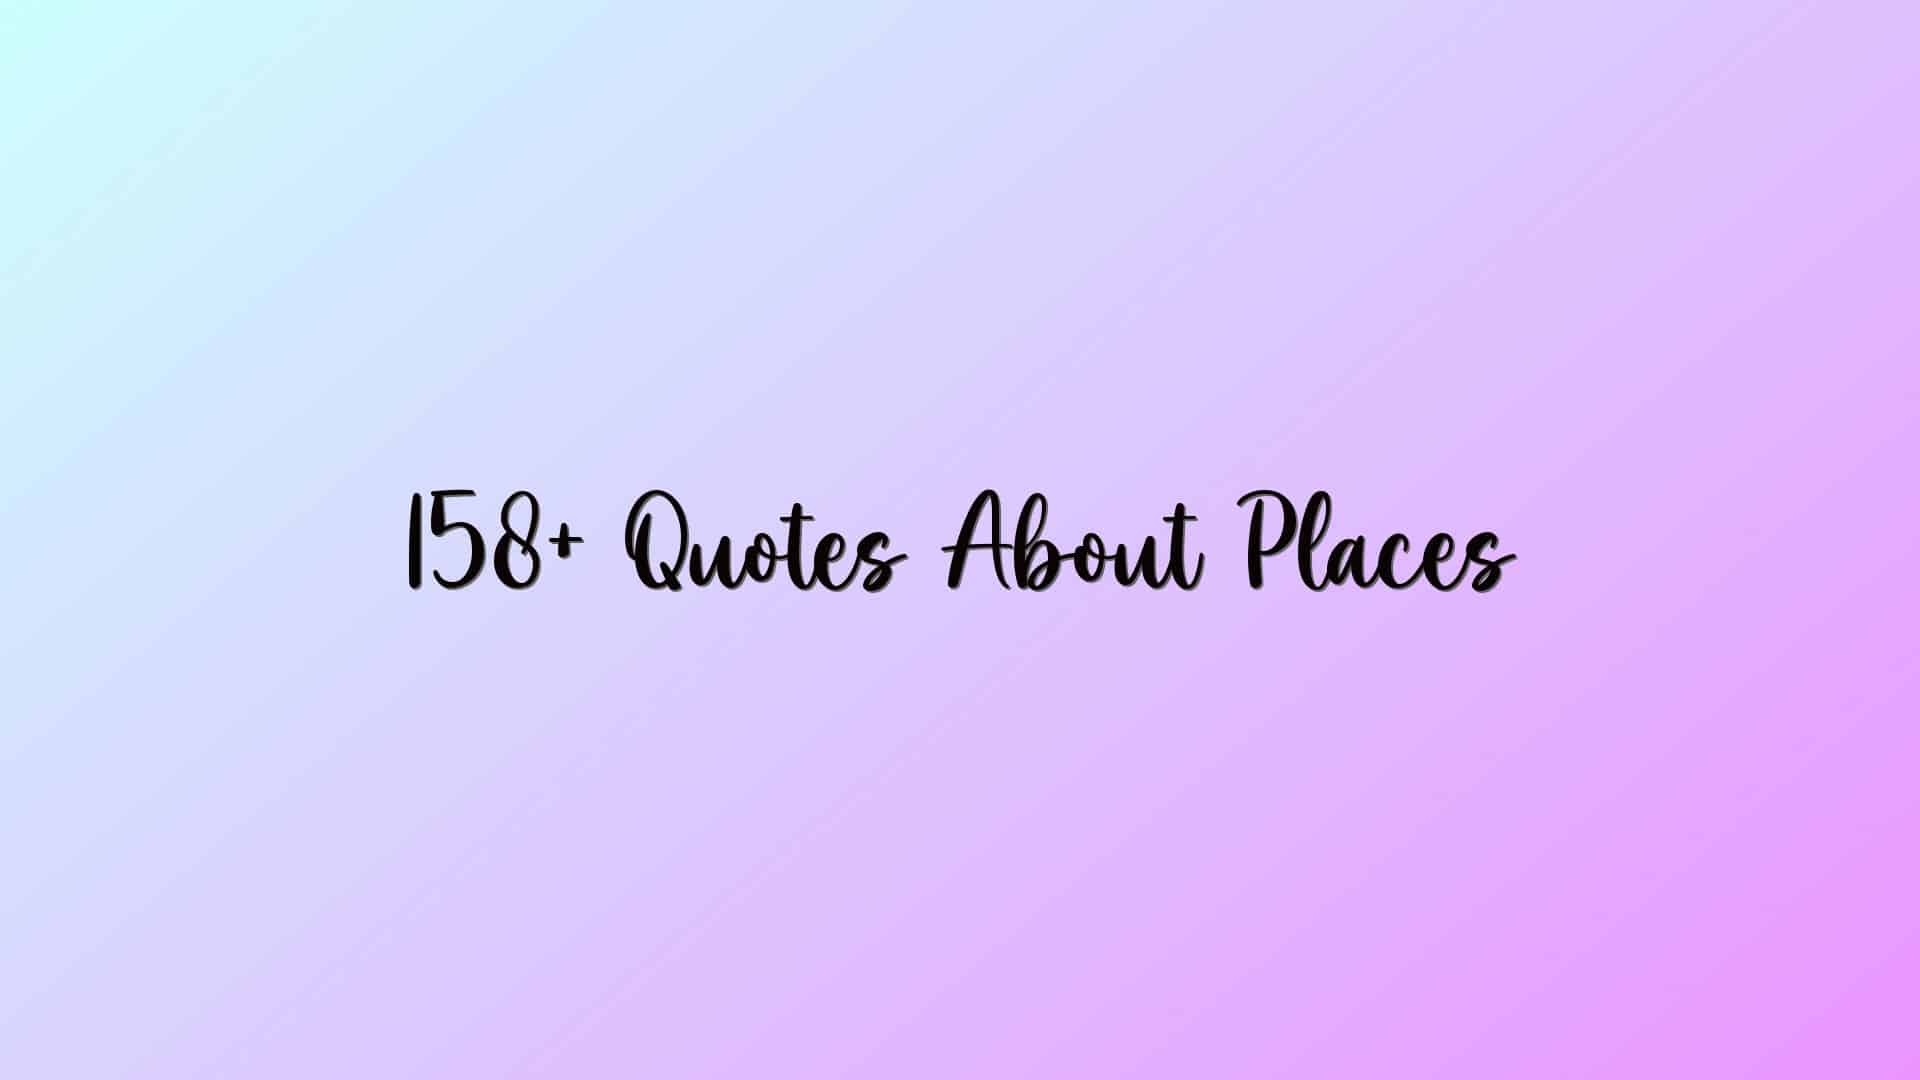 158+ Quotes About Places